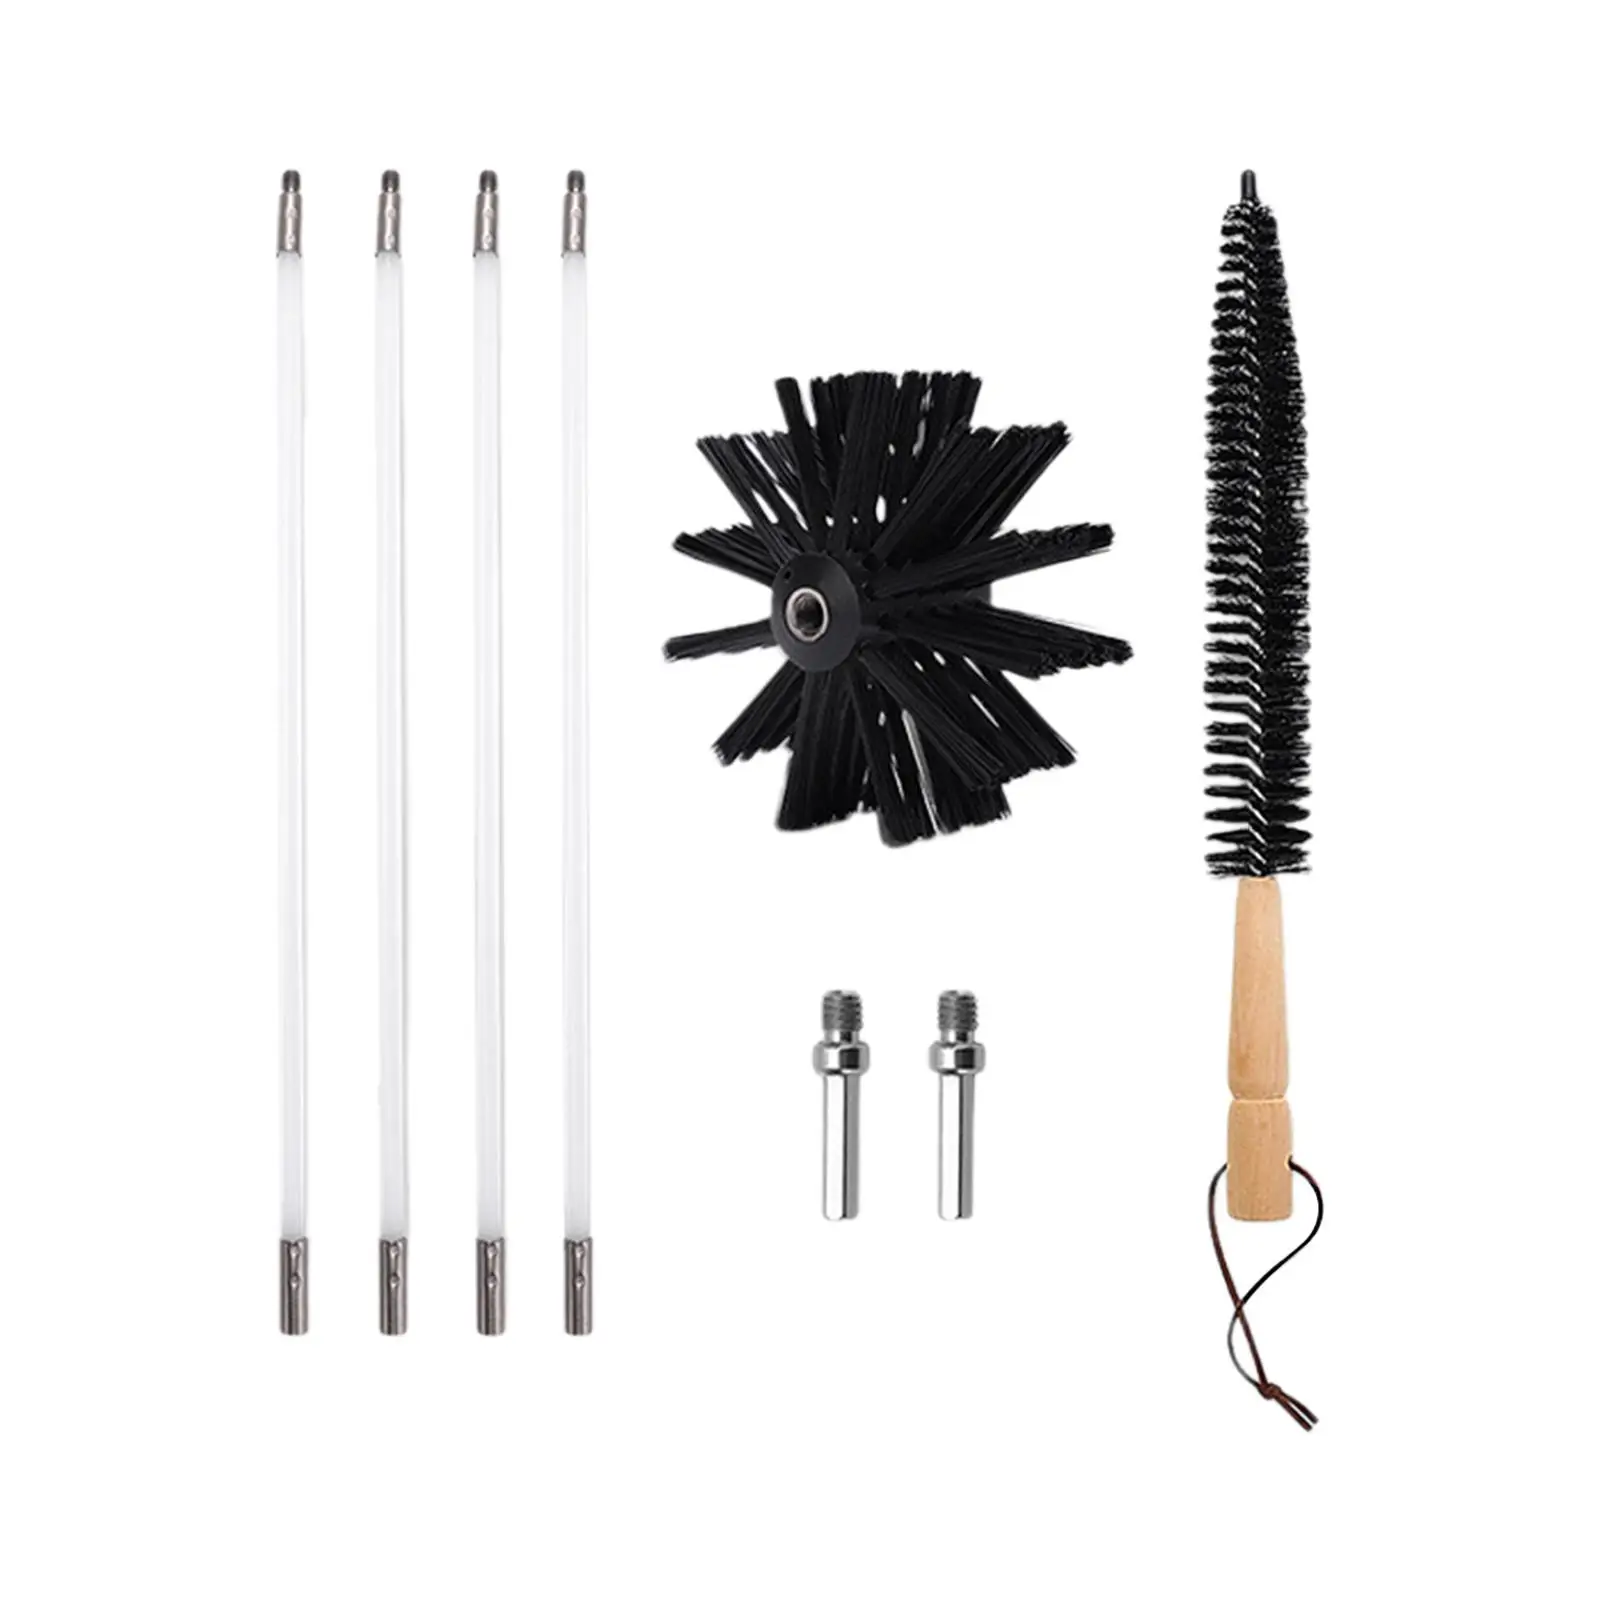 Dry Duct Cleaning Kit Flexible 4 Rods Heat Resistant Nylon Brush Accessories